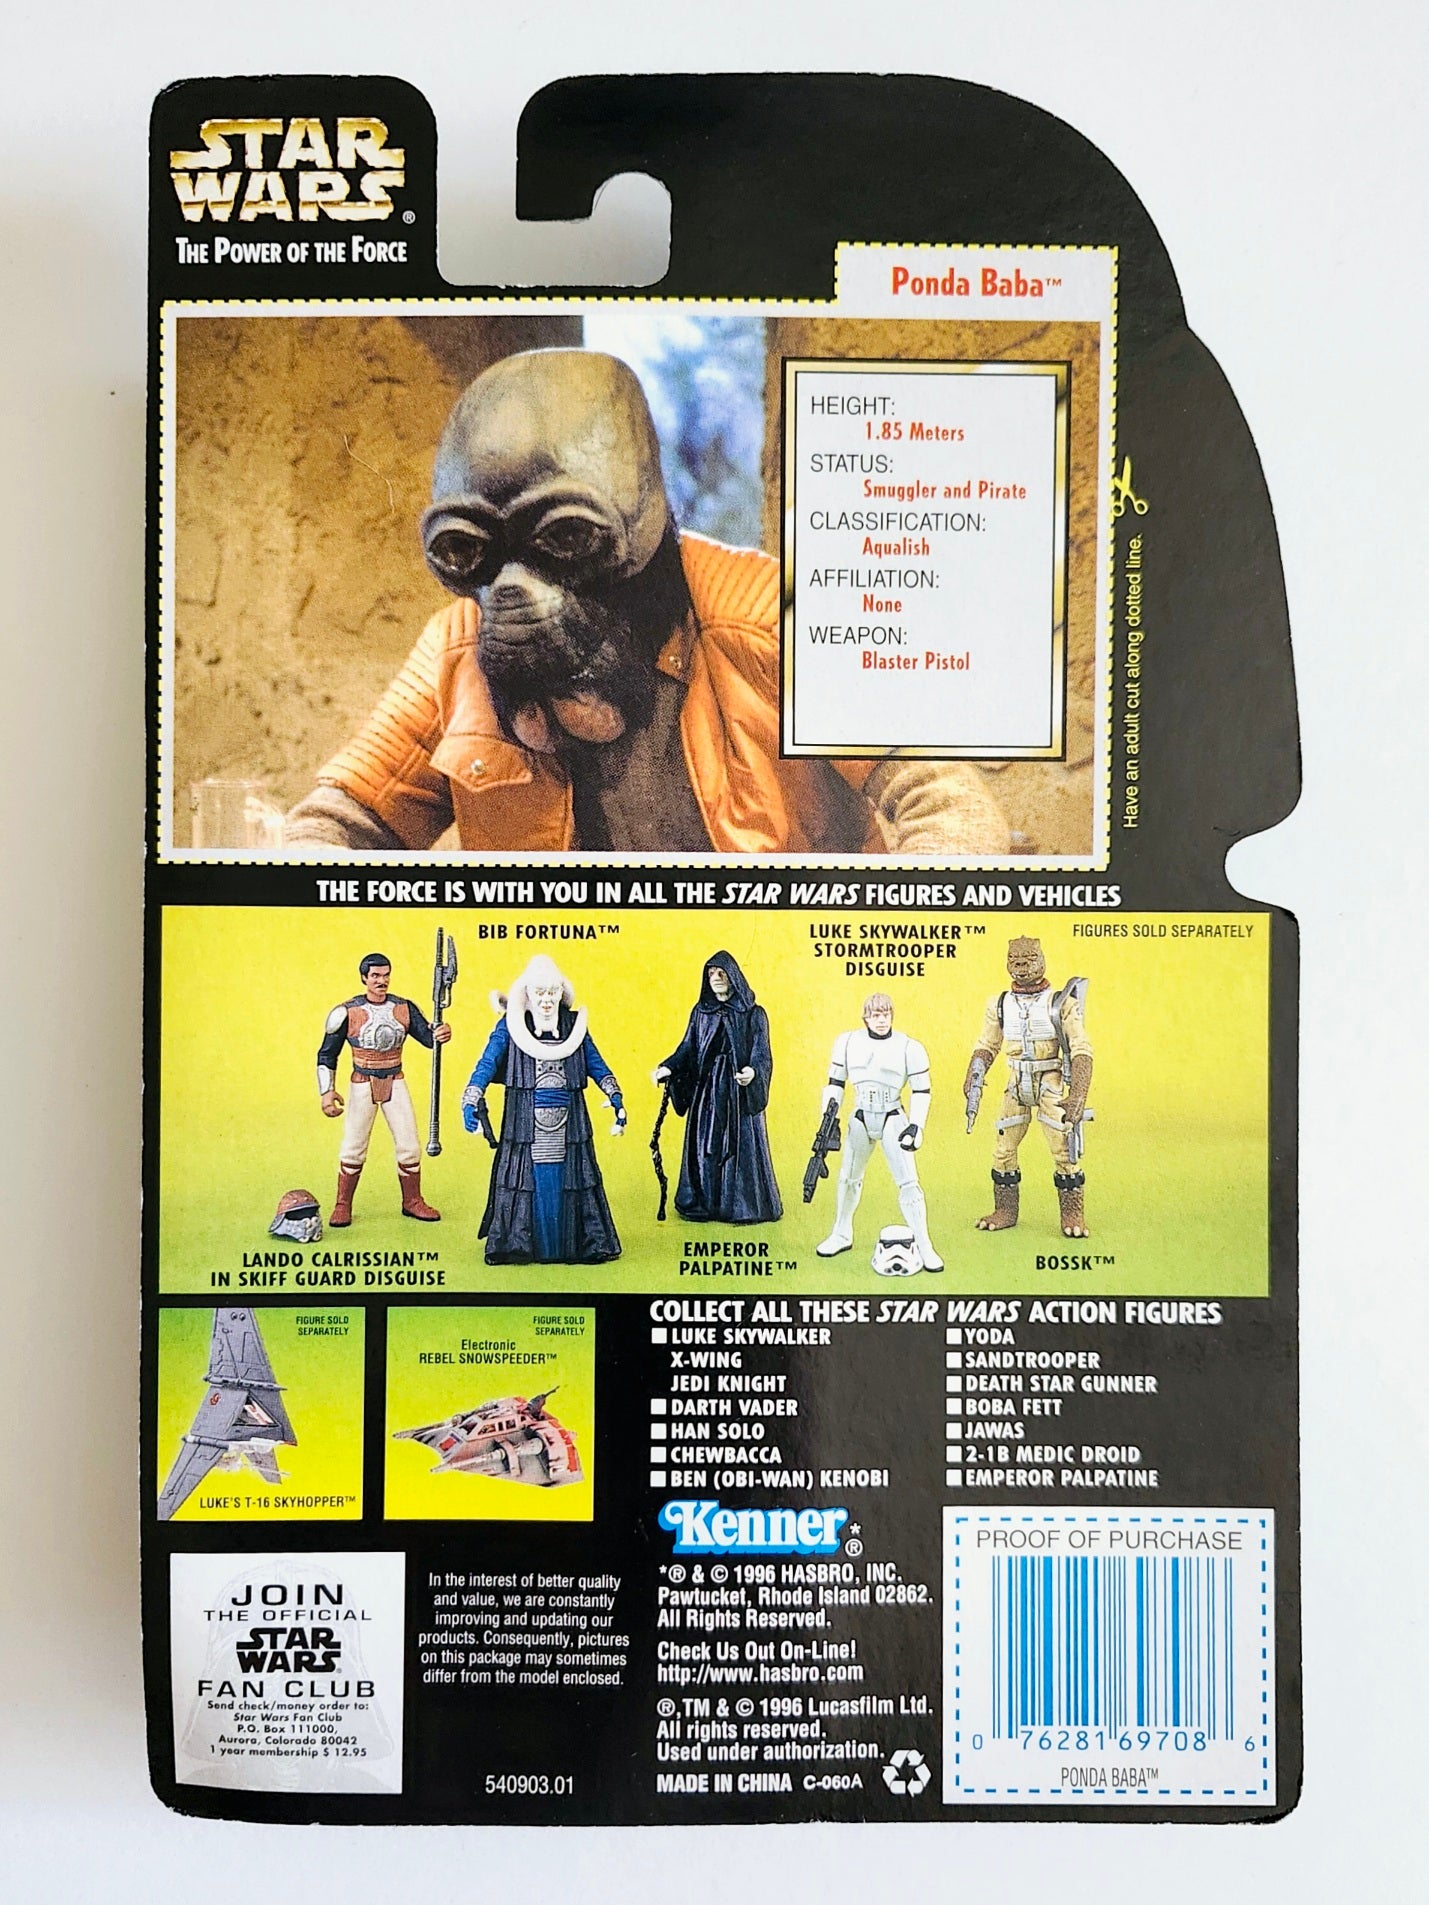 Star Wars: Power of the Force Ponda Baba (Hologram Card) 3.75-Inch Action Figure